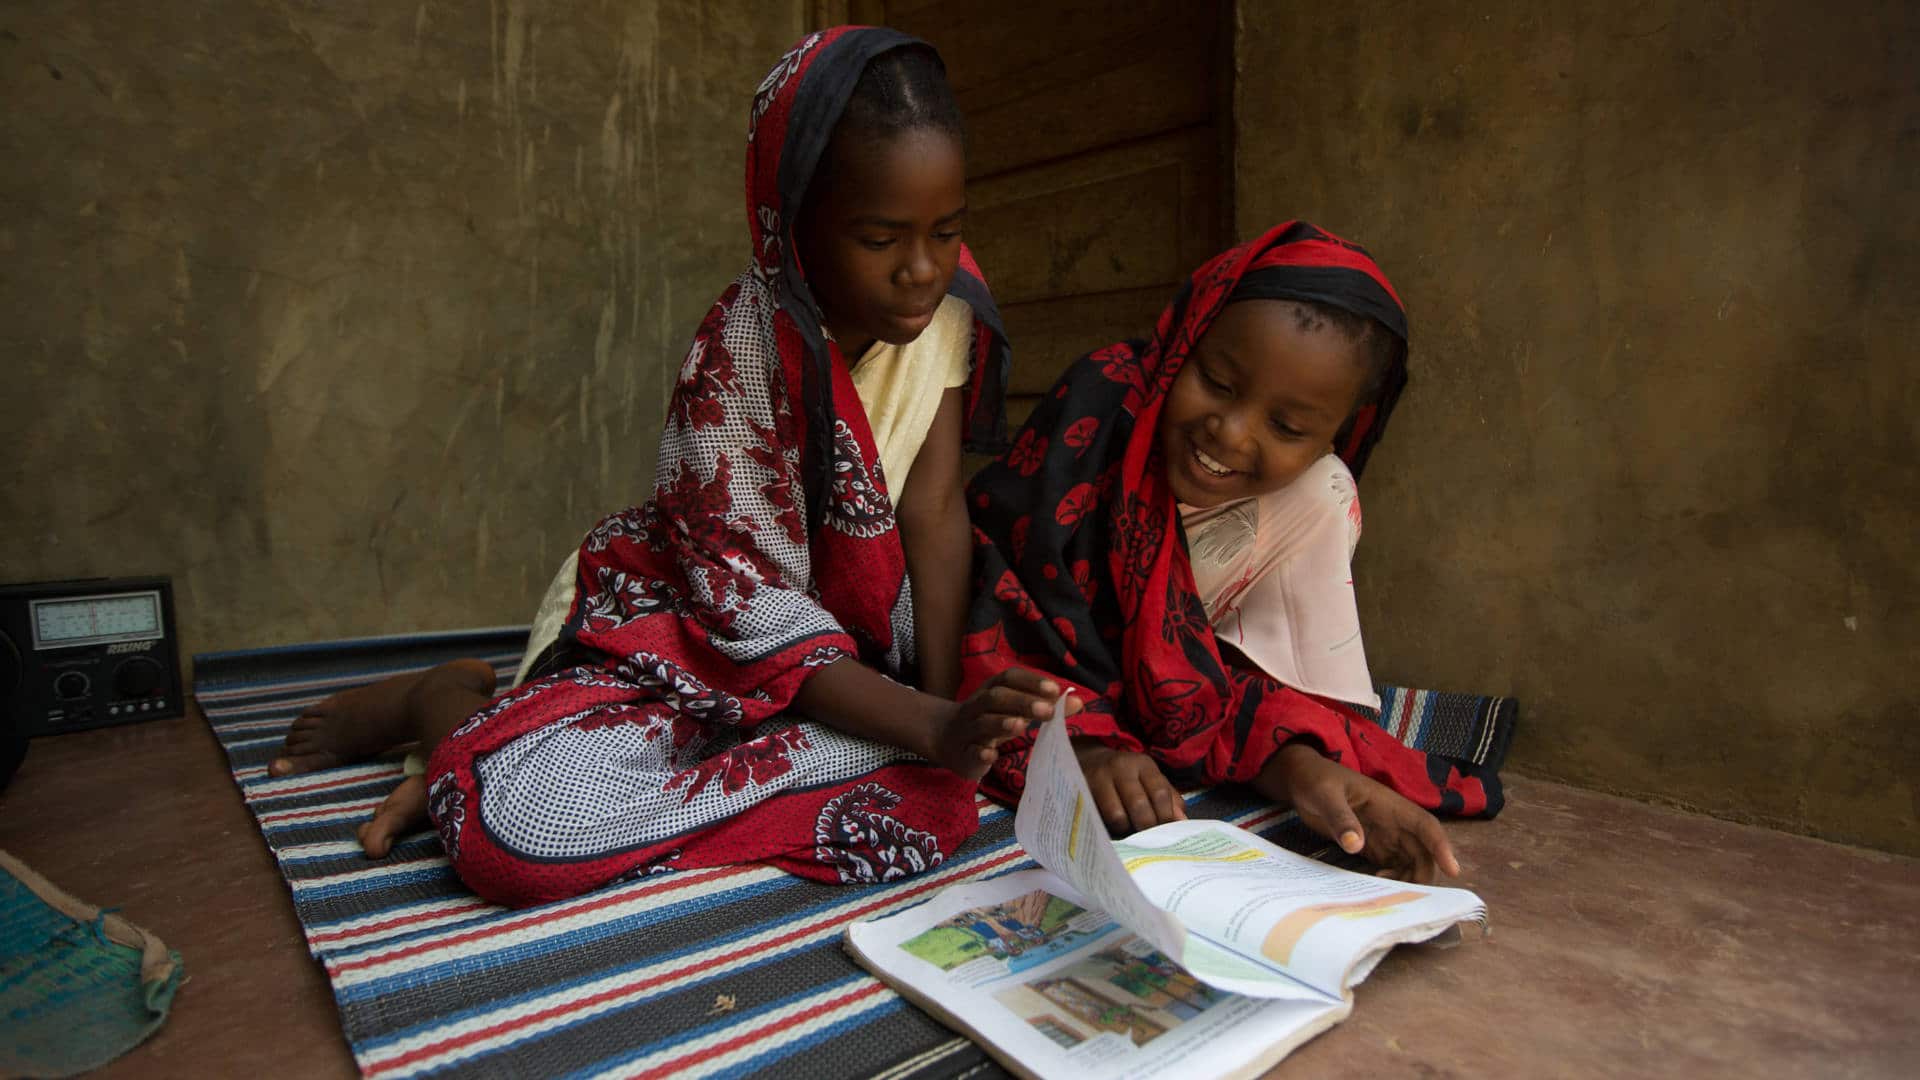 In Zanzibar, Tanzania, two girls study educational materials about preventing malaria — one of several diseases predicted get worse as suitable climate conditions for pathogens spread.